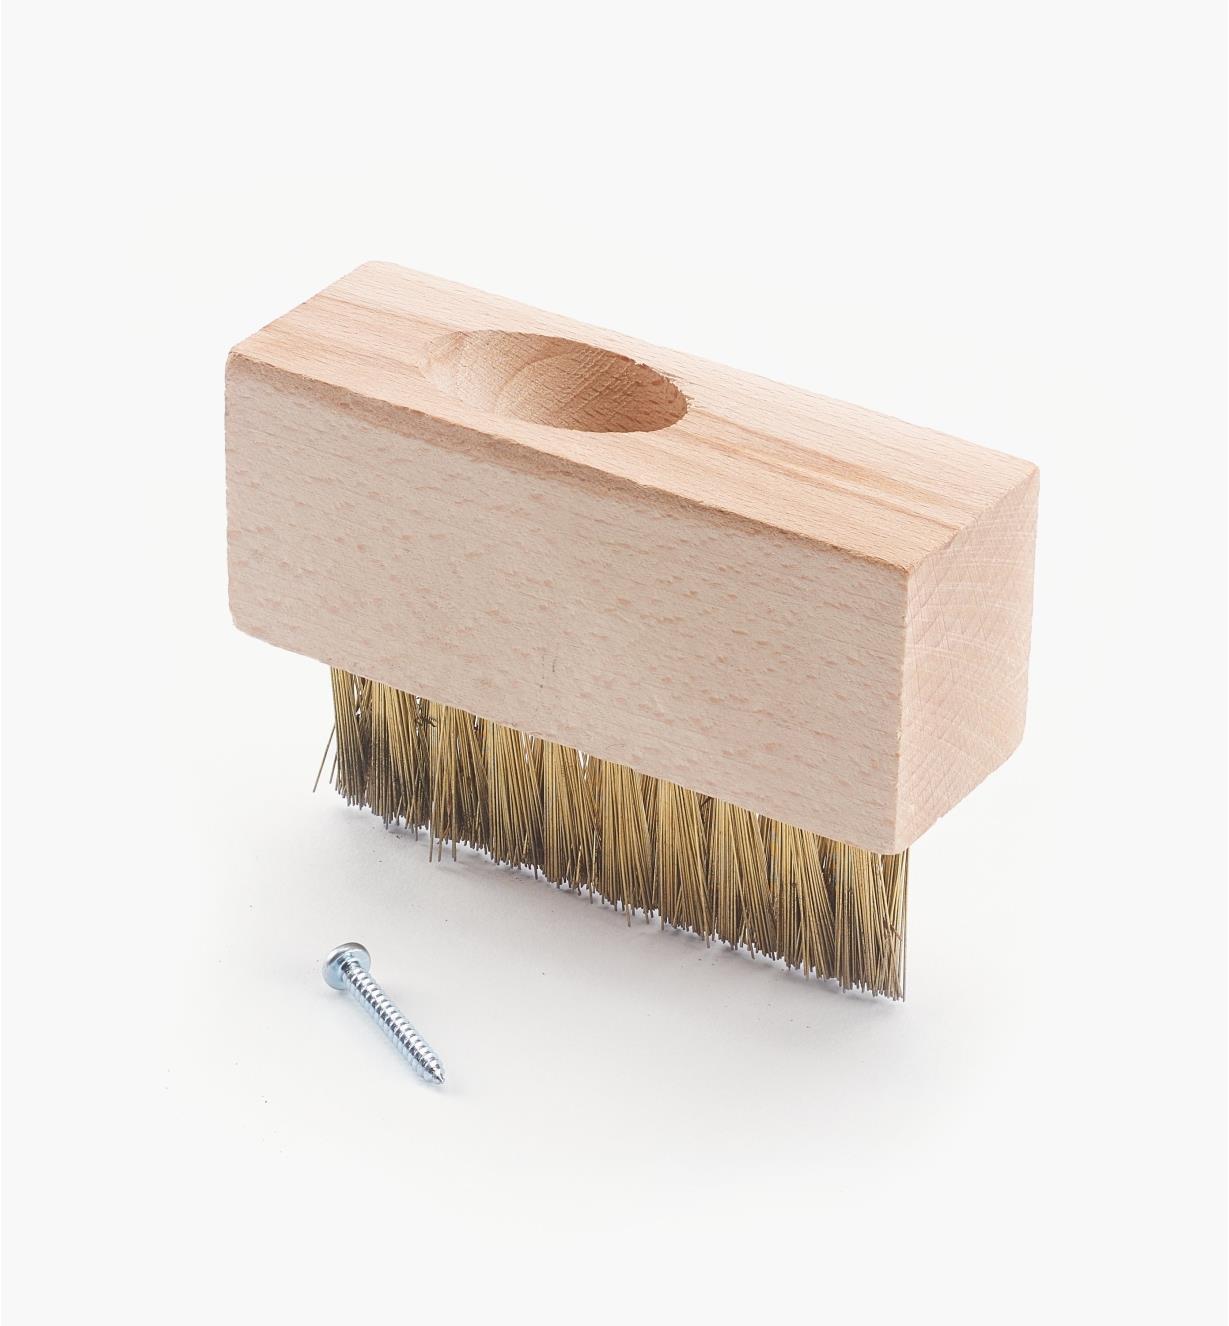 Weed brush with screw